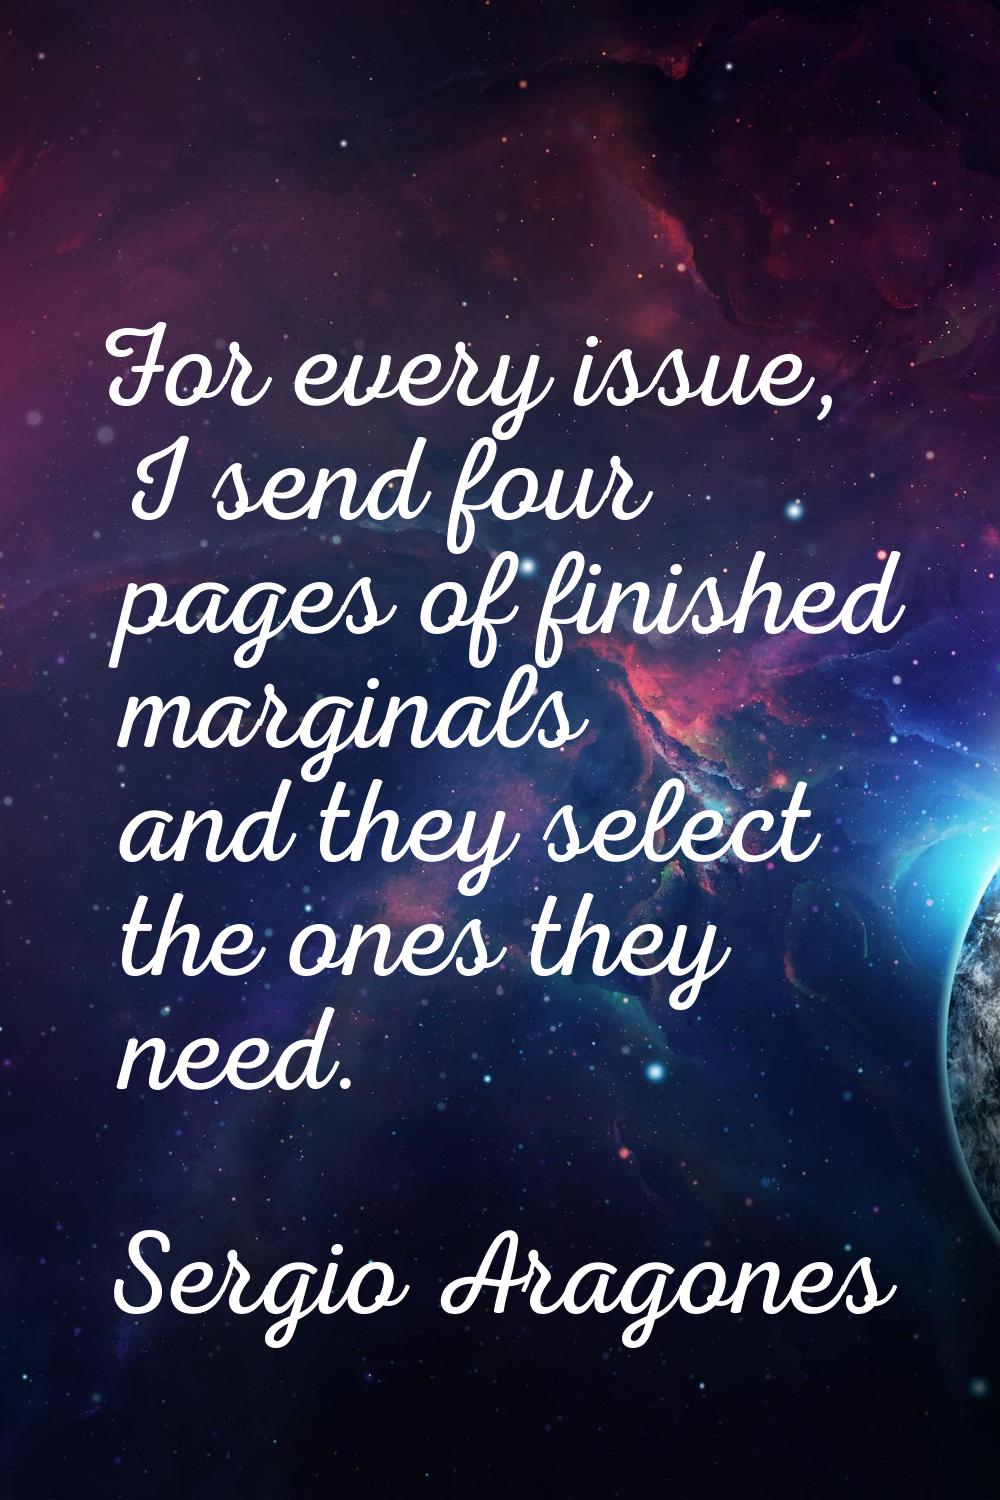 For every issue, I send four pages of finished marginals and they select the ones they need.